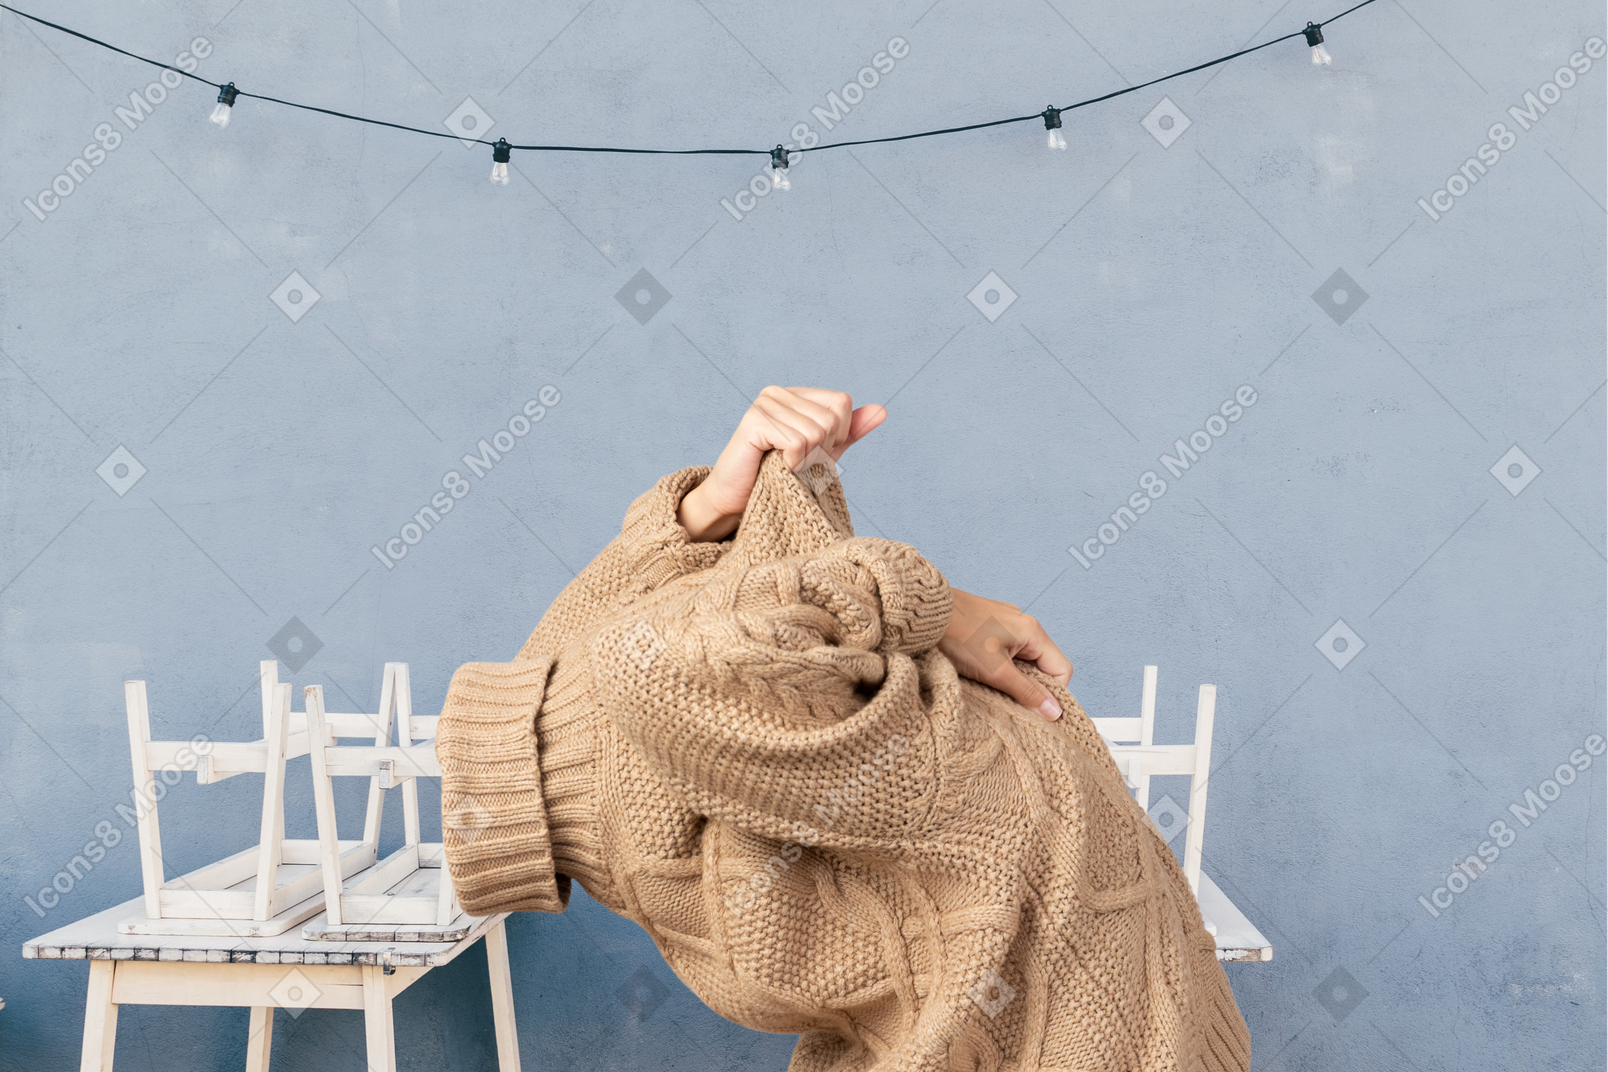 A woman taking off a sweater